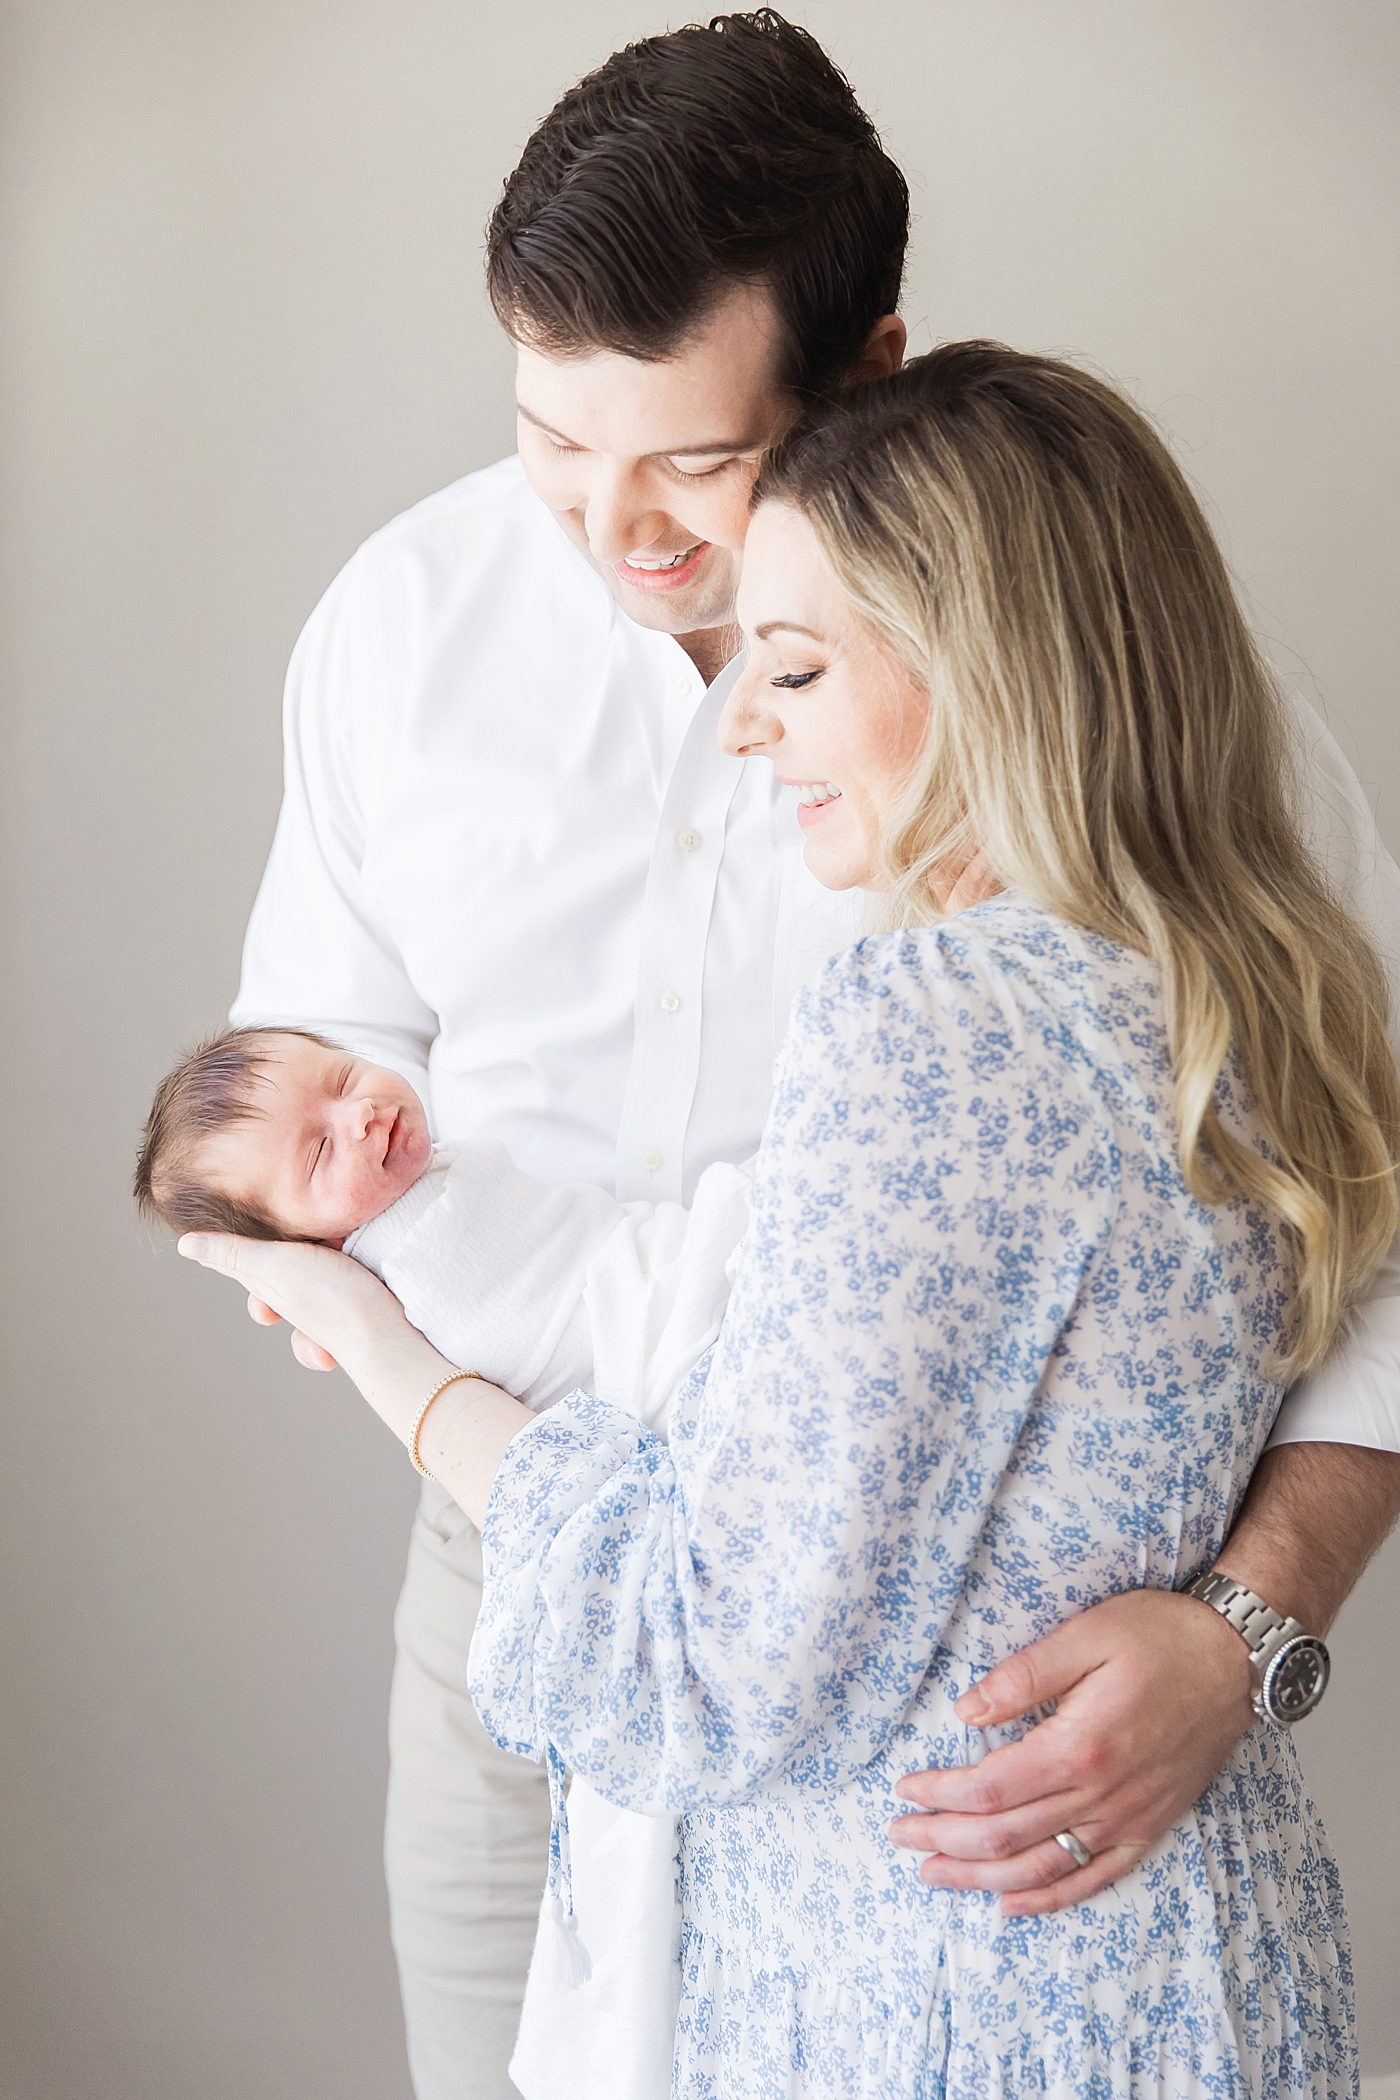 Mom and Dad holding their daughter and she smiles during newborn photoshoot with Fresh Light Photography.